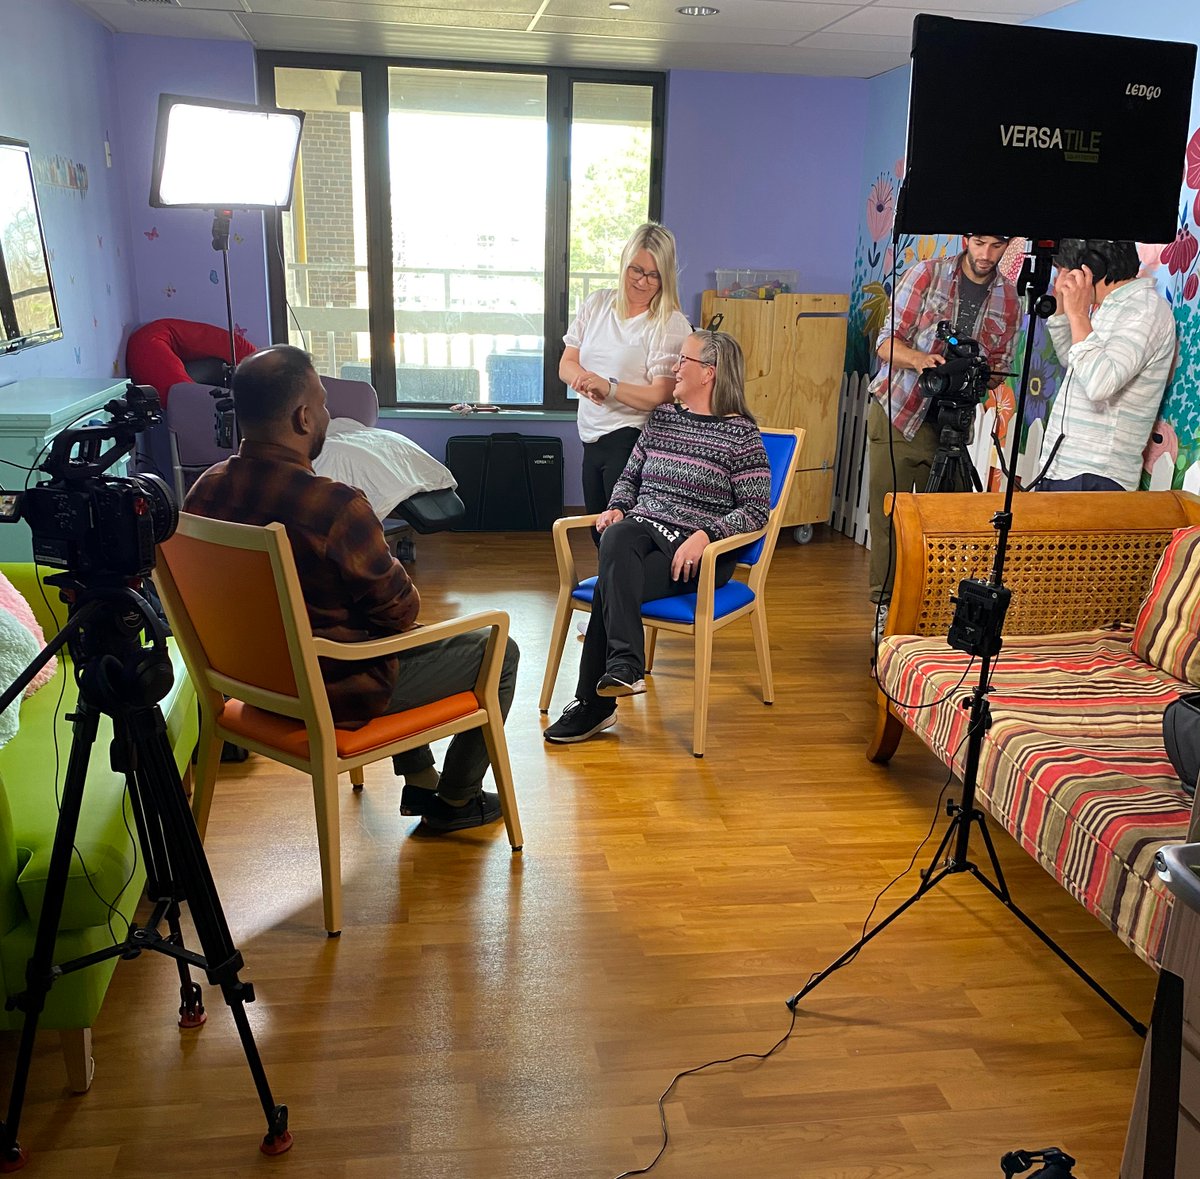 TVO Media Education Group visited Sheridan Villa to explore emotion-based care for dementia. This approach connects deeply with individuals, honoring their unique life stories in a home-like setting. A beautiful way to value and engage those with dementia! 🏡❤️